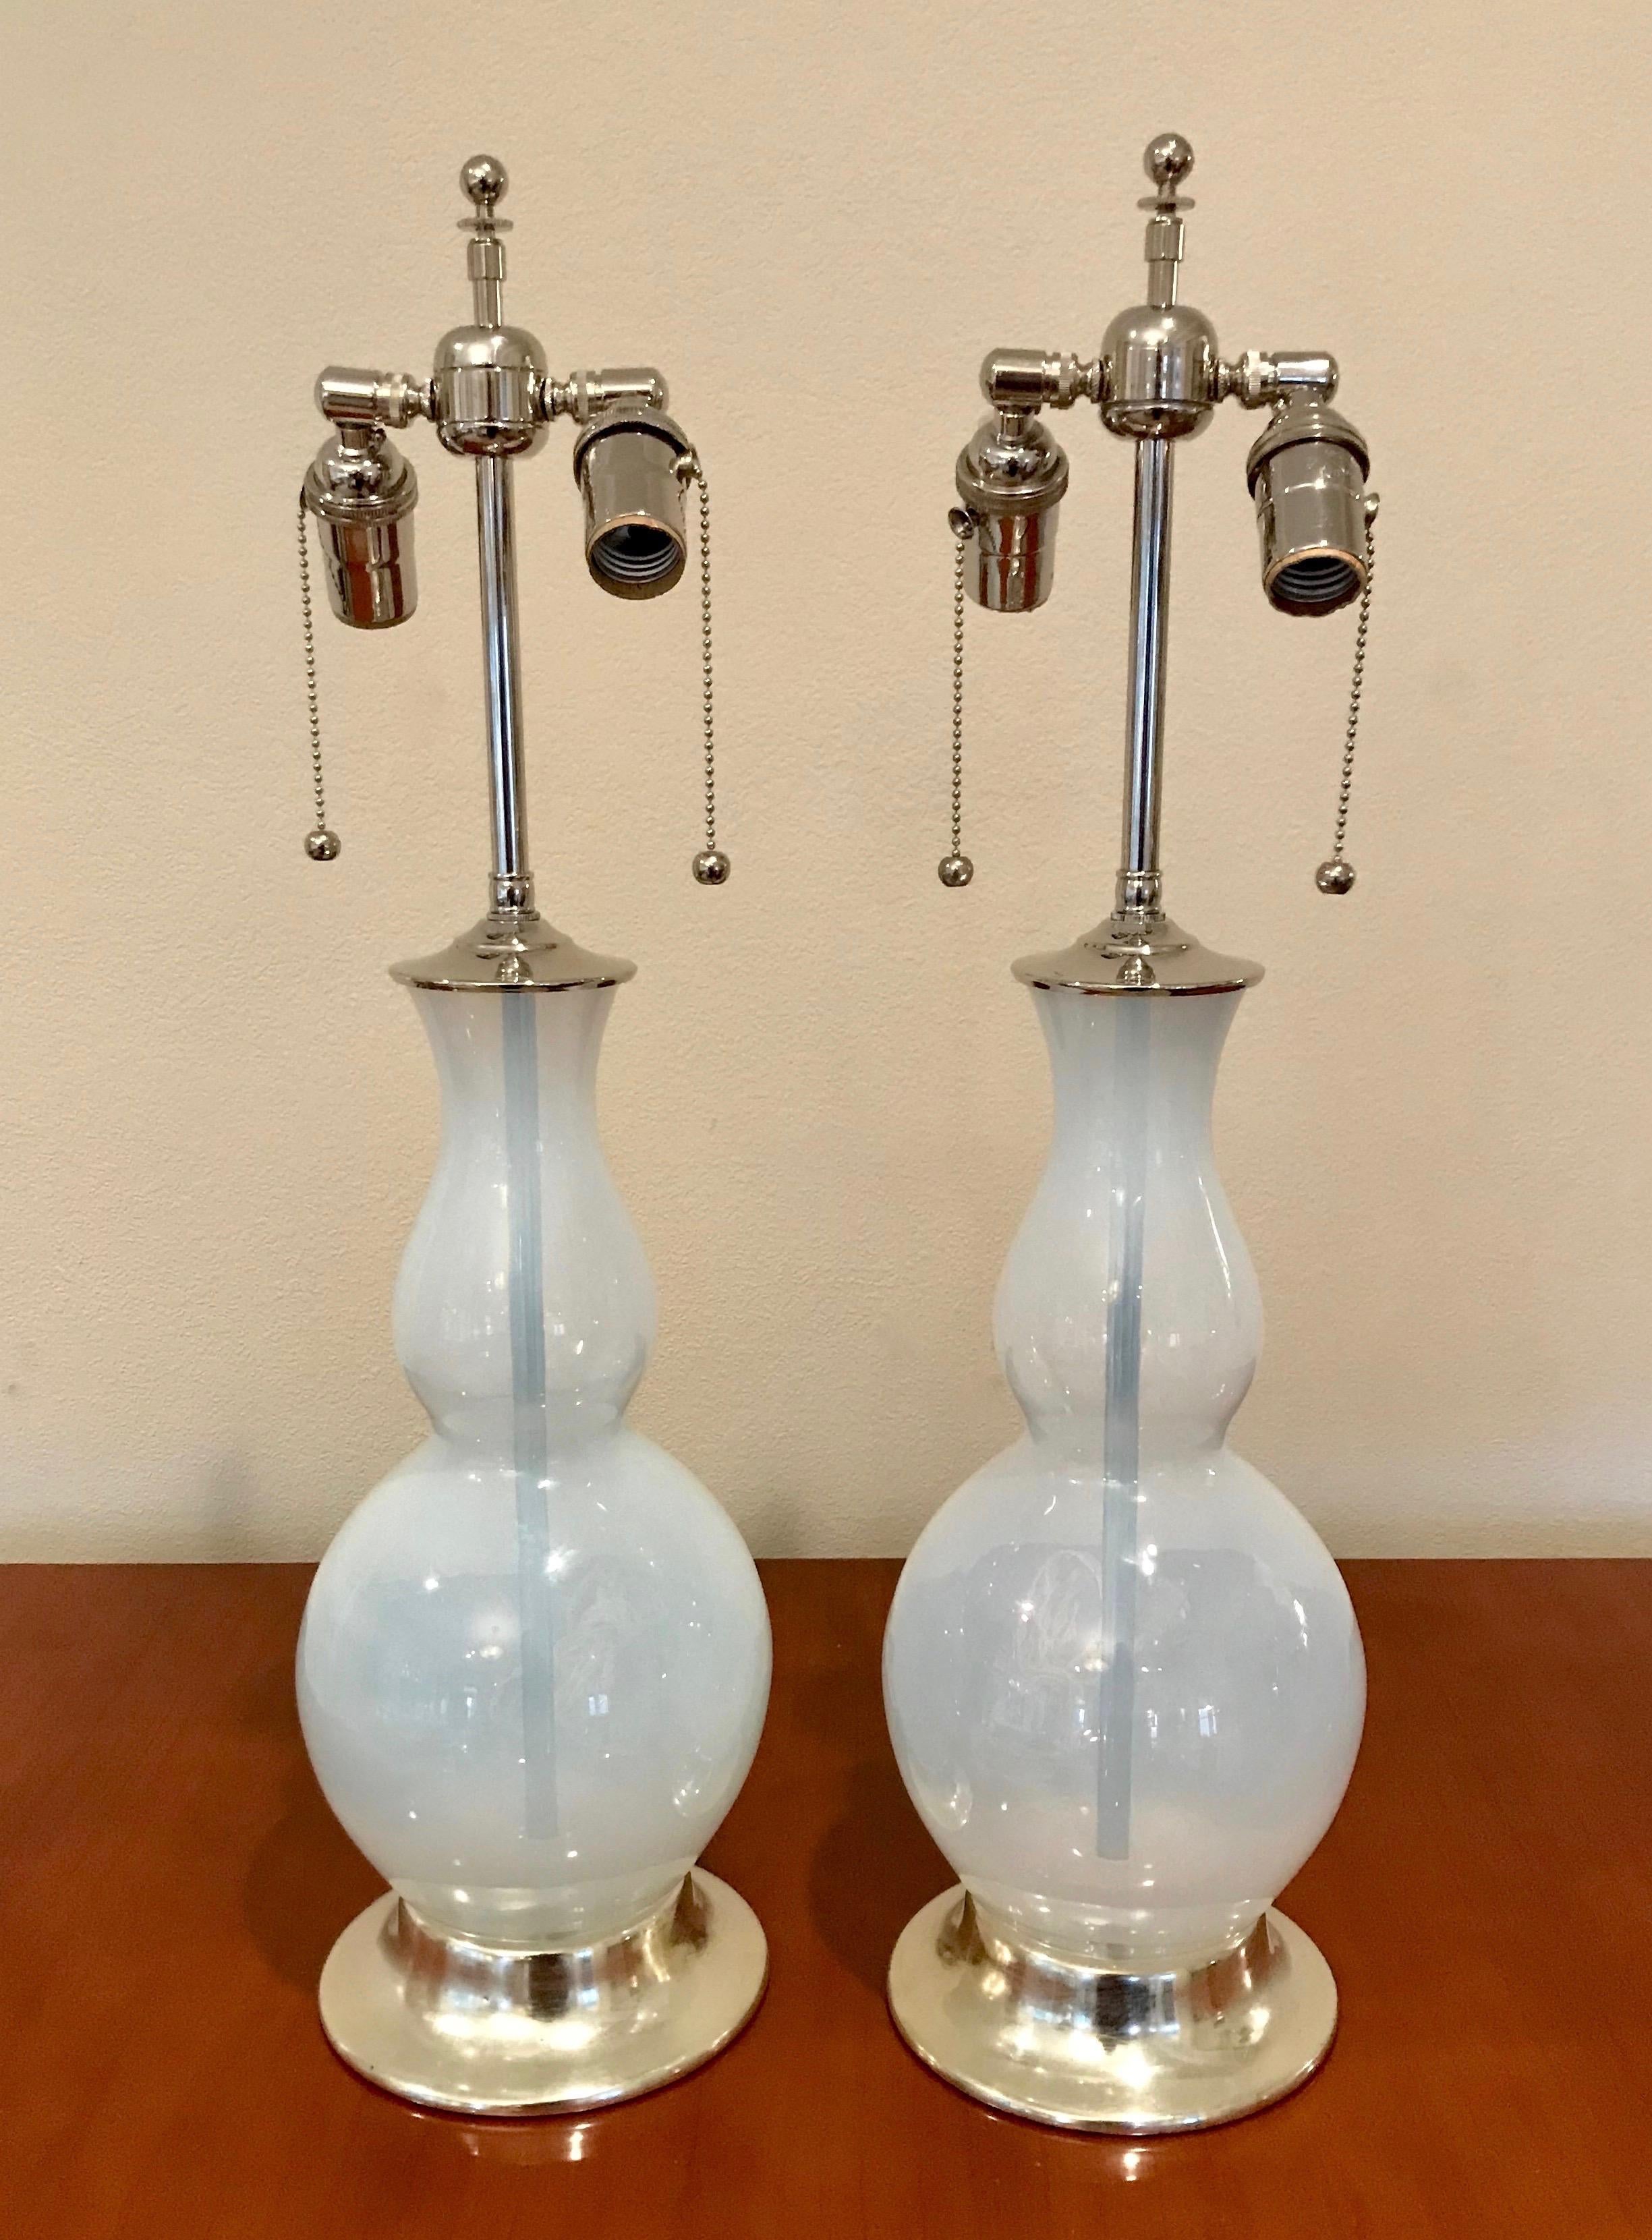 Pair of double gourd shaped opalescent Murano glass lamps on turned wood lamp bases in a 12-karat white gold water gilt finish. Nickel plated fittings with on/off double cluster sockets and French style twisted rayon covered cords. Newly wired for